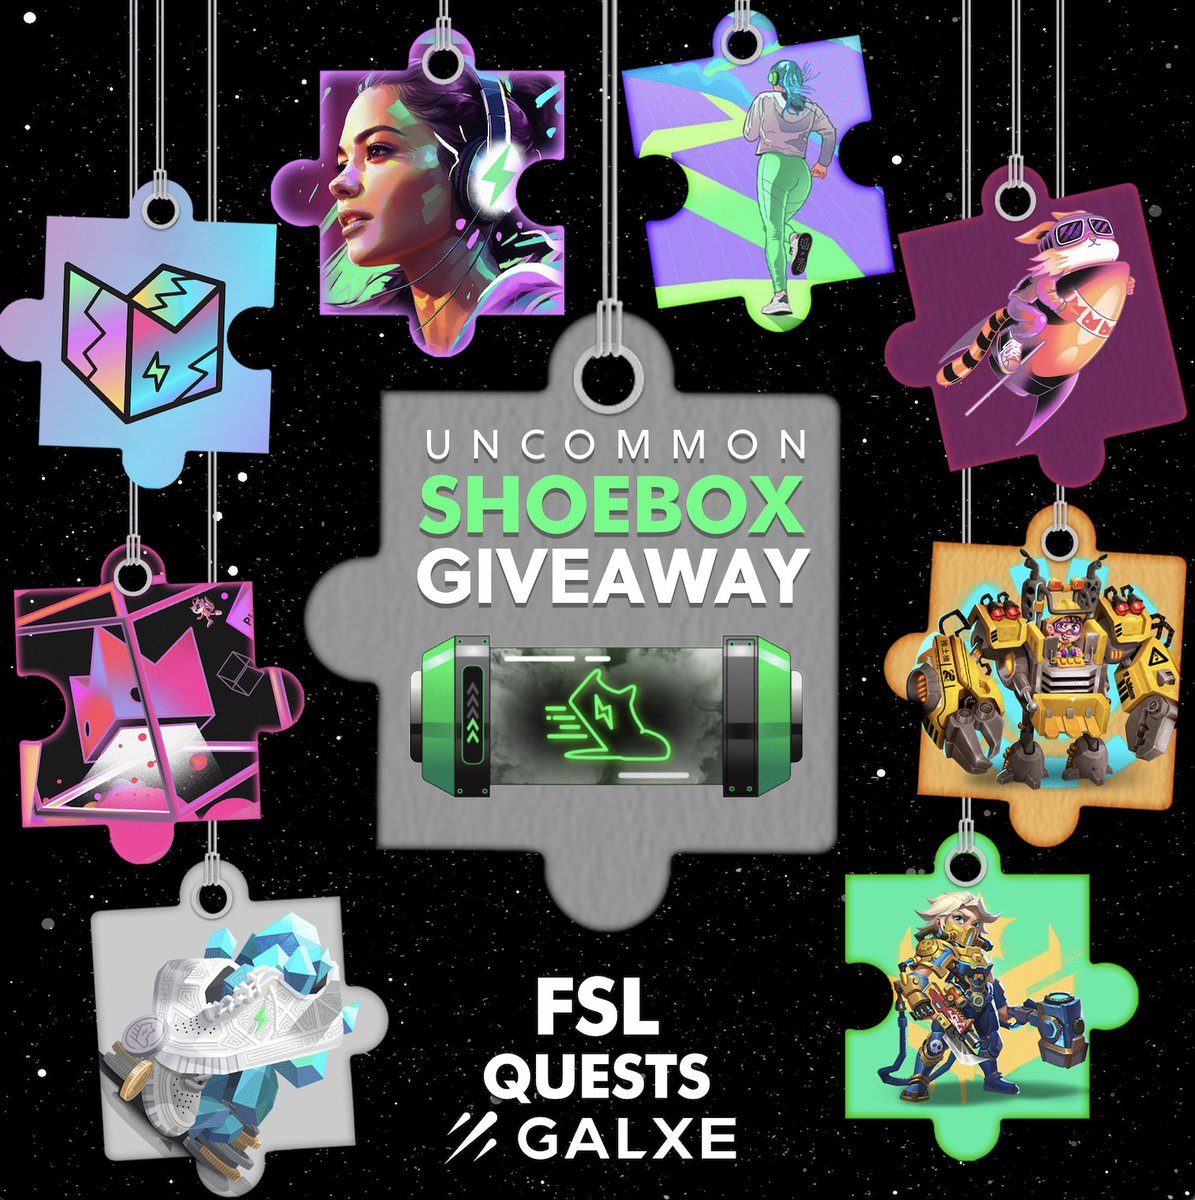 💫 Your path to rewards in a unified #FSL ecosystem

🔄 Create your #FSLID now at id.fsl.com  & start earning points!

🚪 To enter:
🔸Share a screenshot of your linked account in the comments
🔸Follow @fslweb3 & @FSLQuests
🔸Tag #FSL #FSLID
🔸Like & Retweet